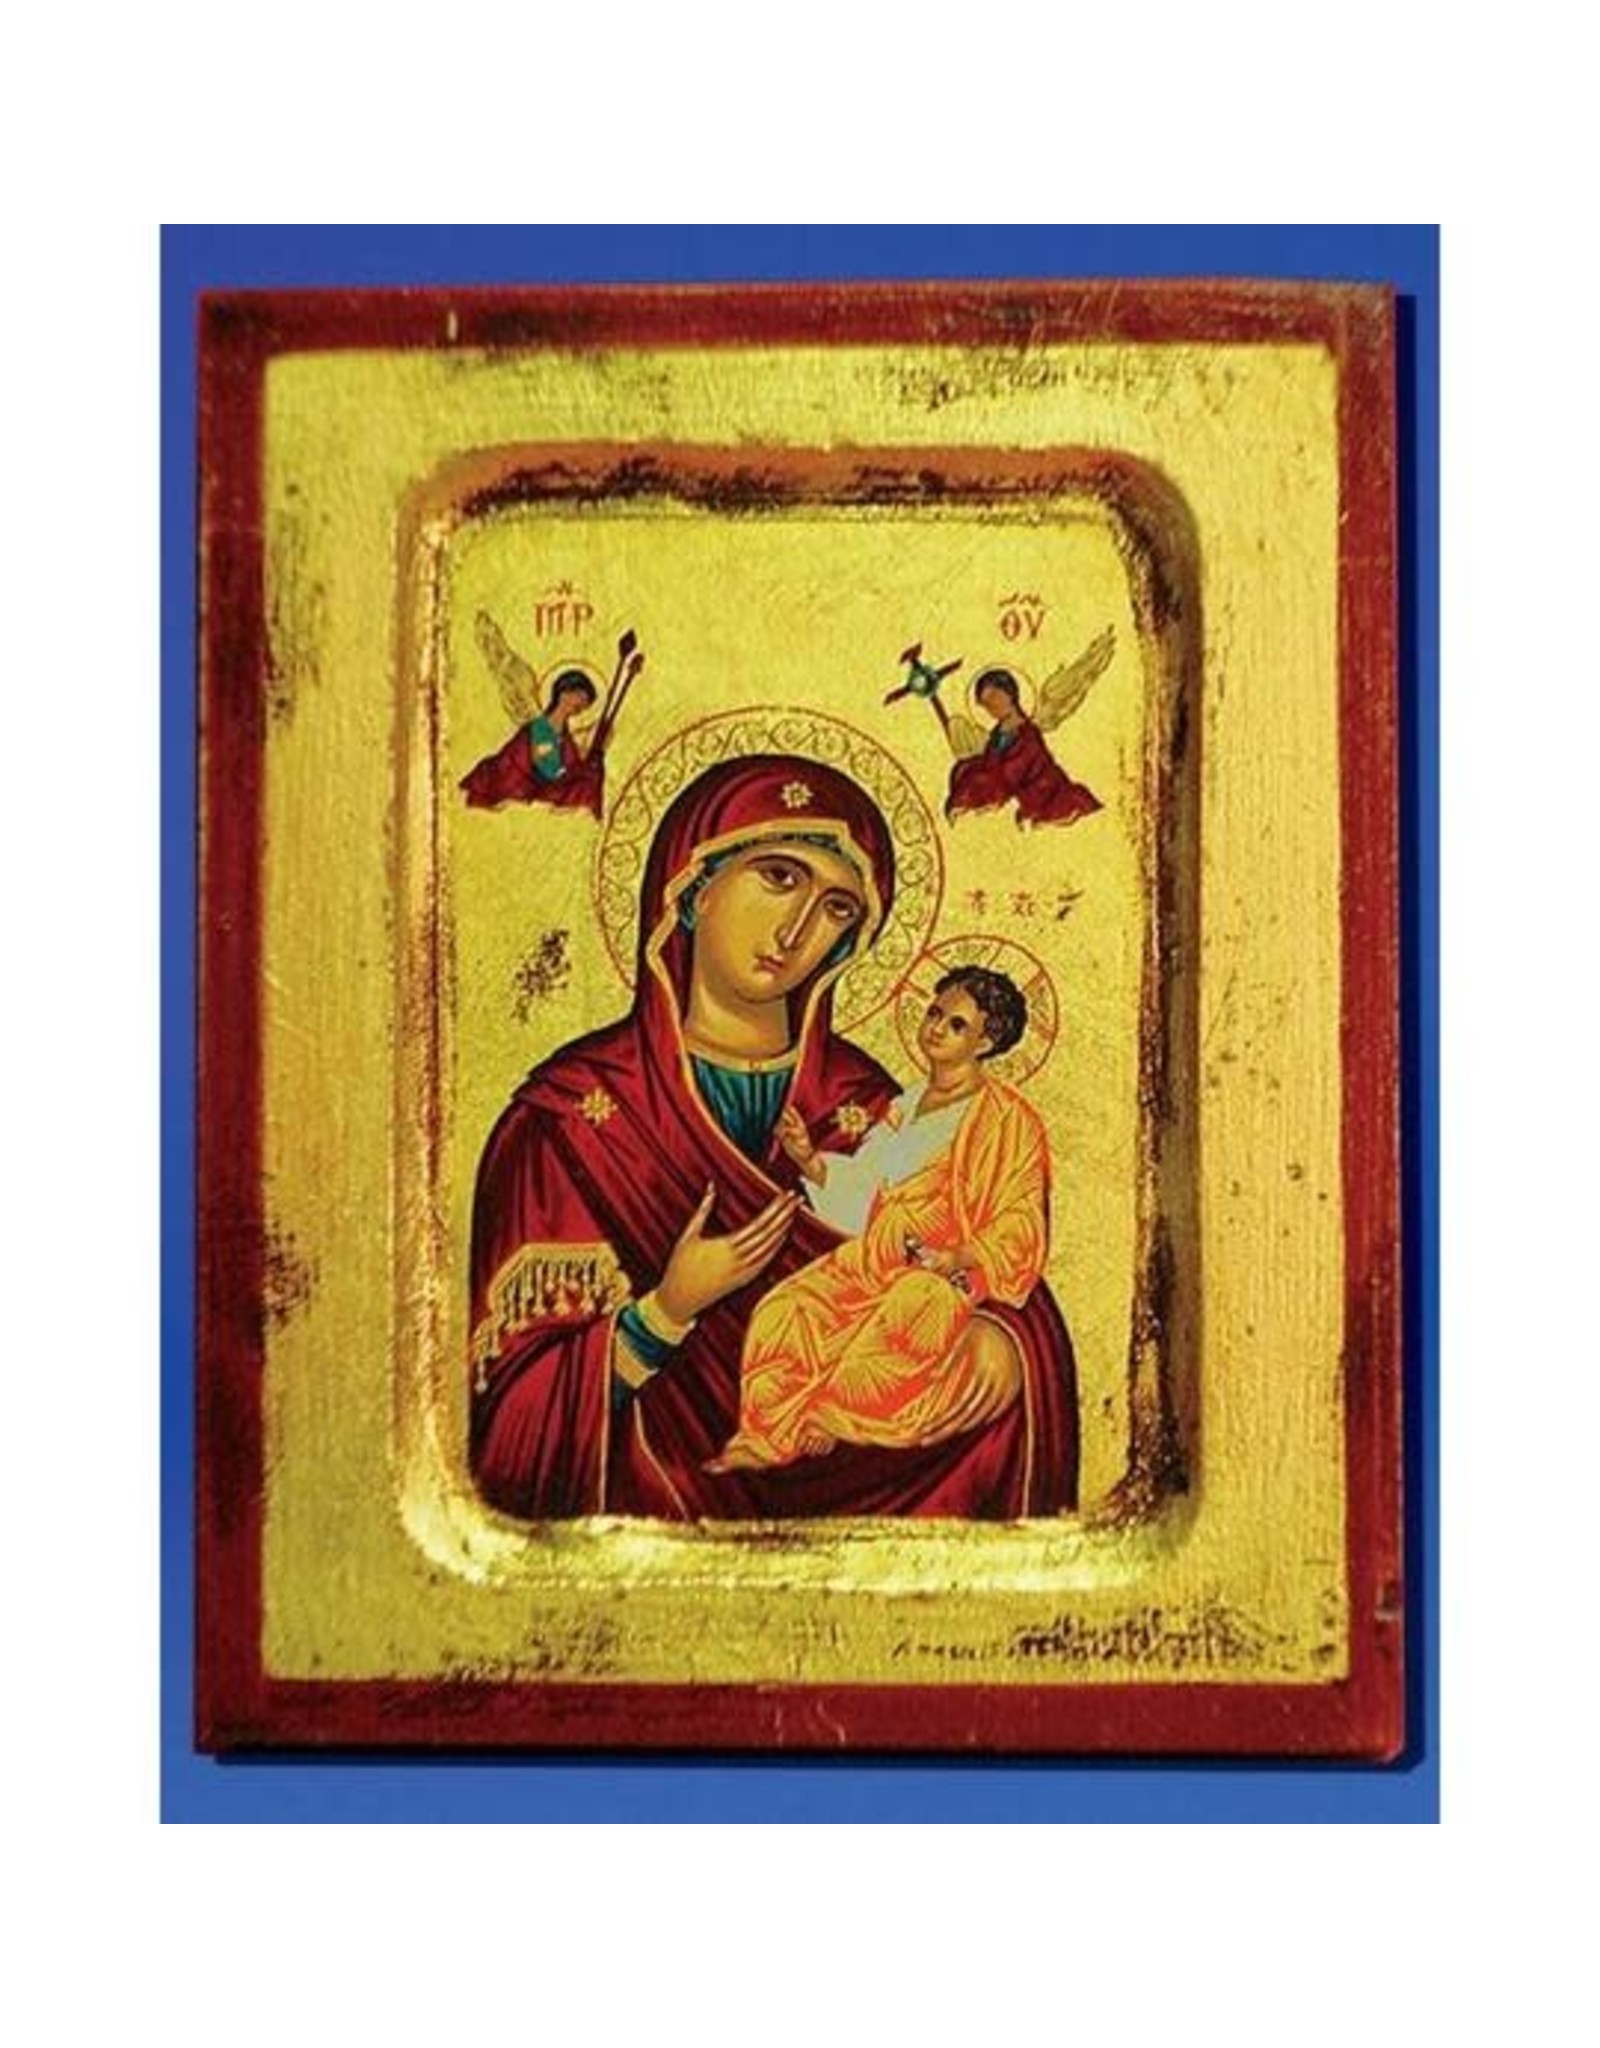 Lumen Mundi Virgin Mary of the Passion Hand Painted Icon Made in Greece, 5.75" x 7.25" x 1"